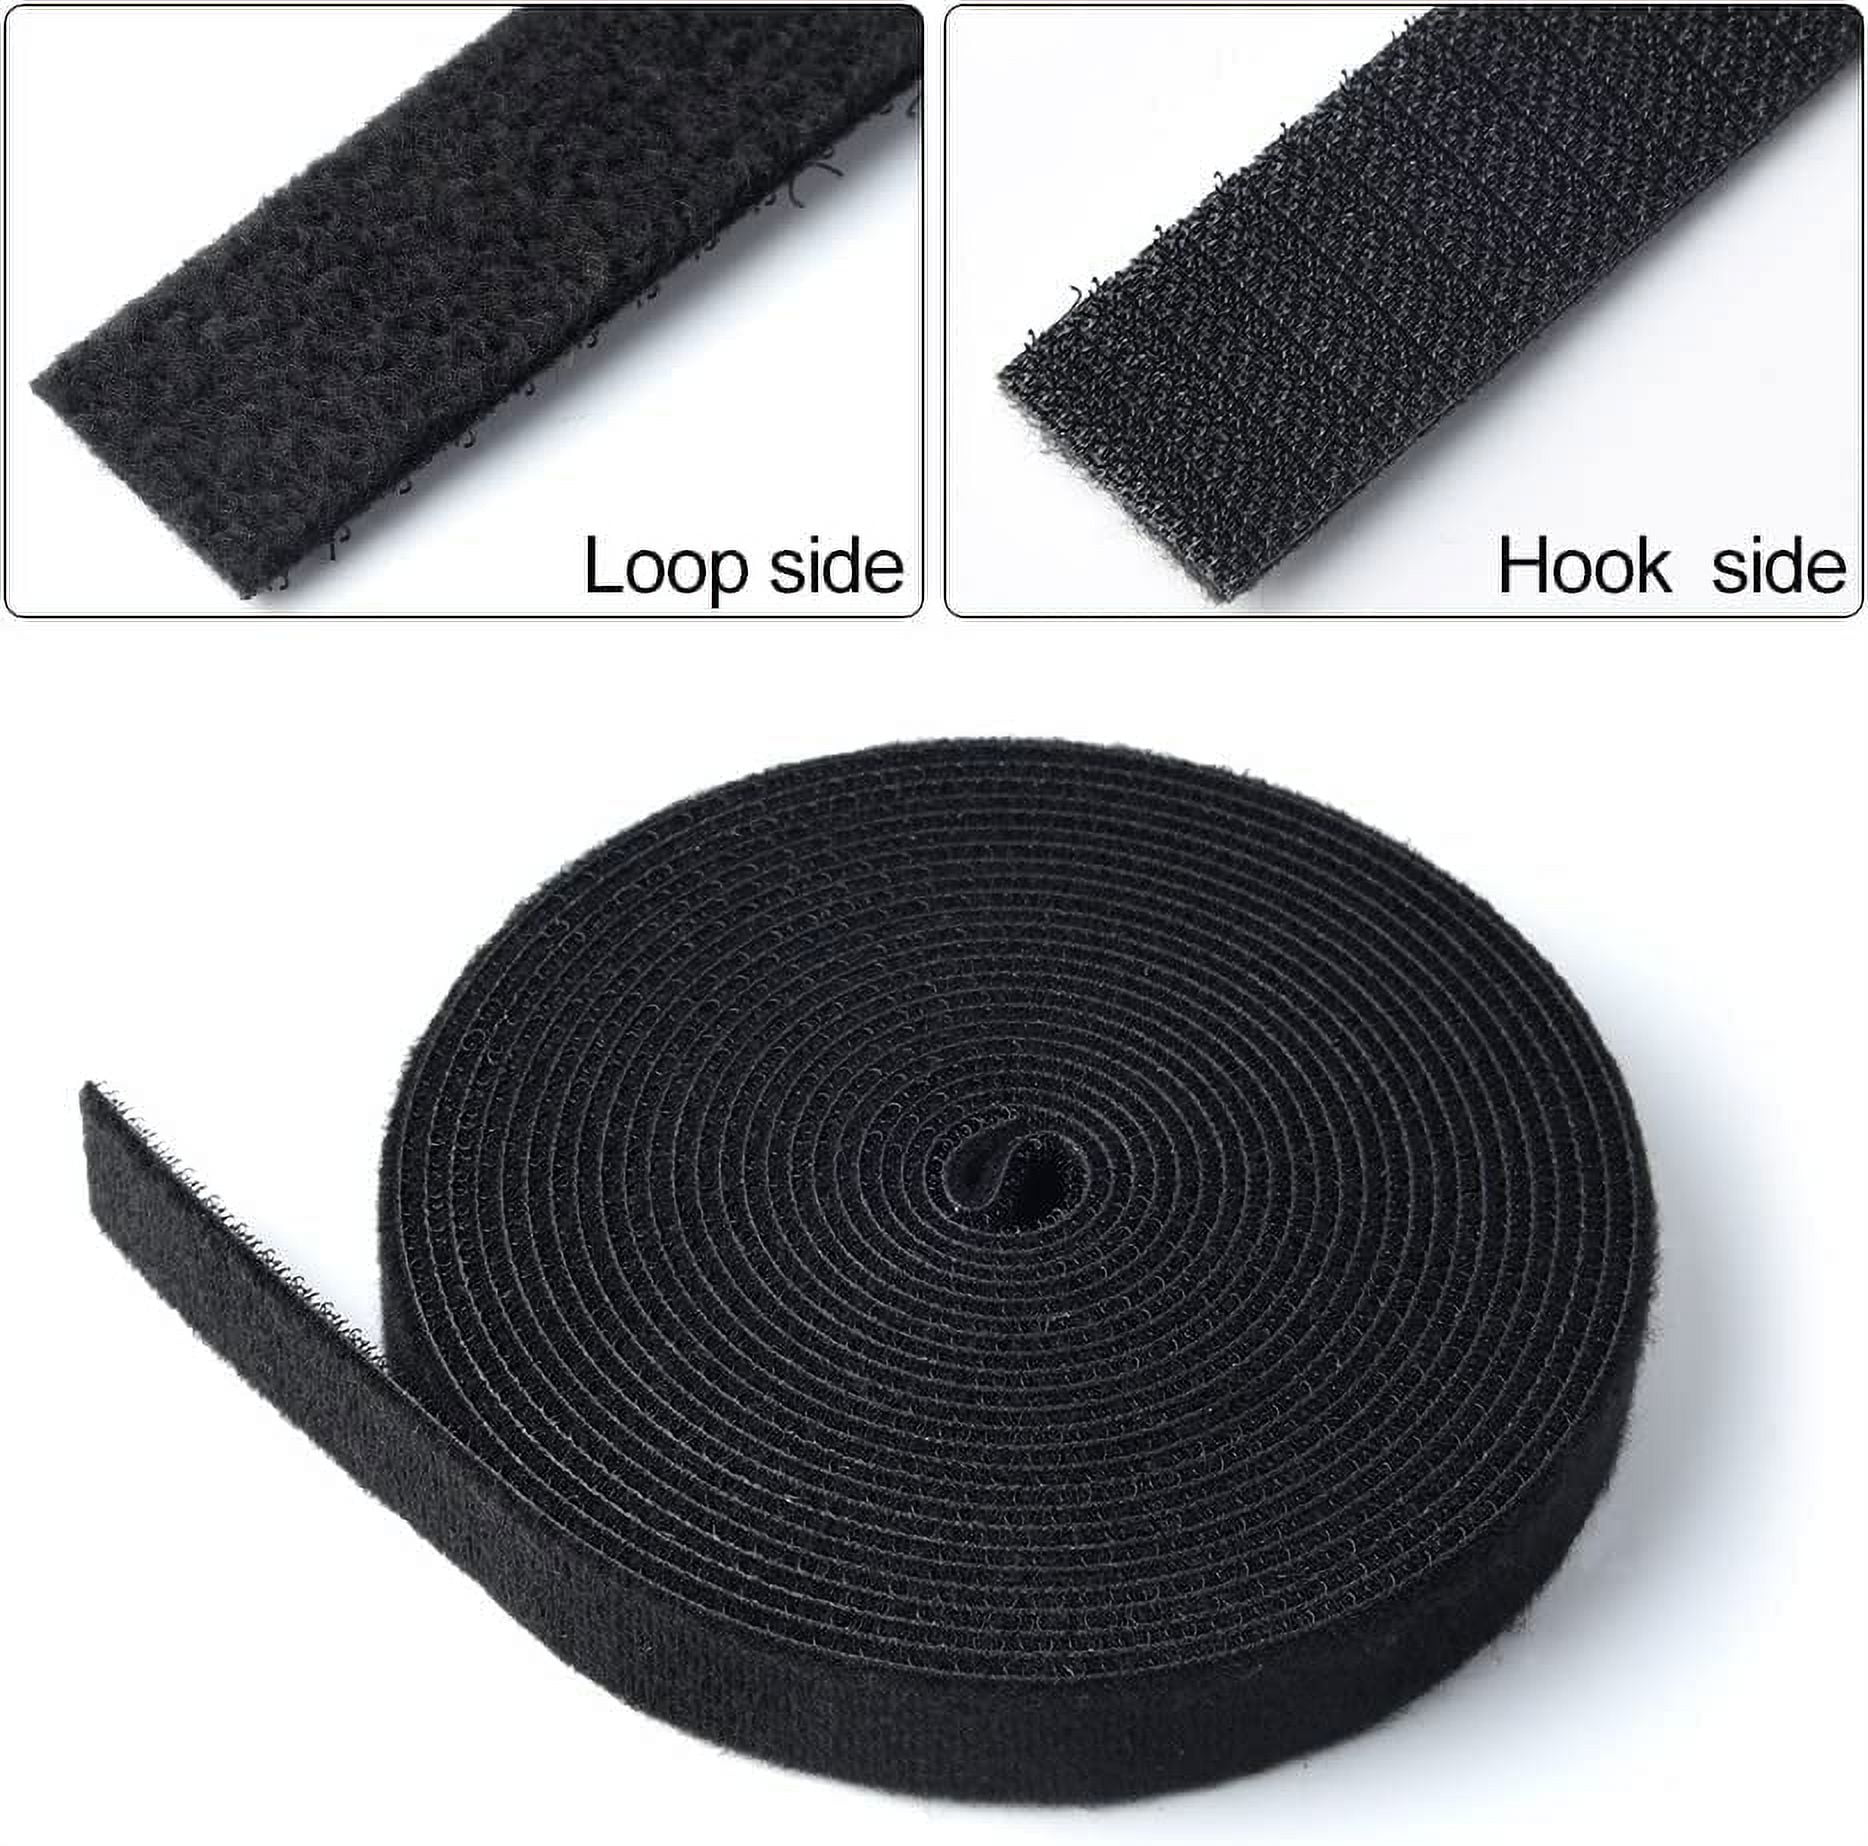 82ft x 1/2inch Hook Loop Cable Ties - Fastening Cable Ties Reusable Cable  Straps Double-Sided Self Gripping Fastener Cable Management Tape for  Home,Office, Wire Bundling 